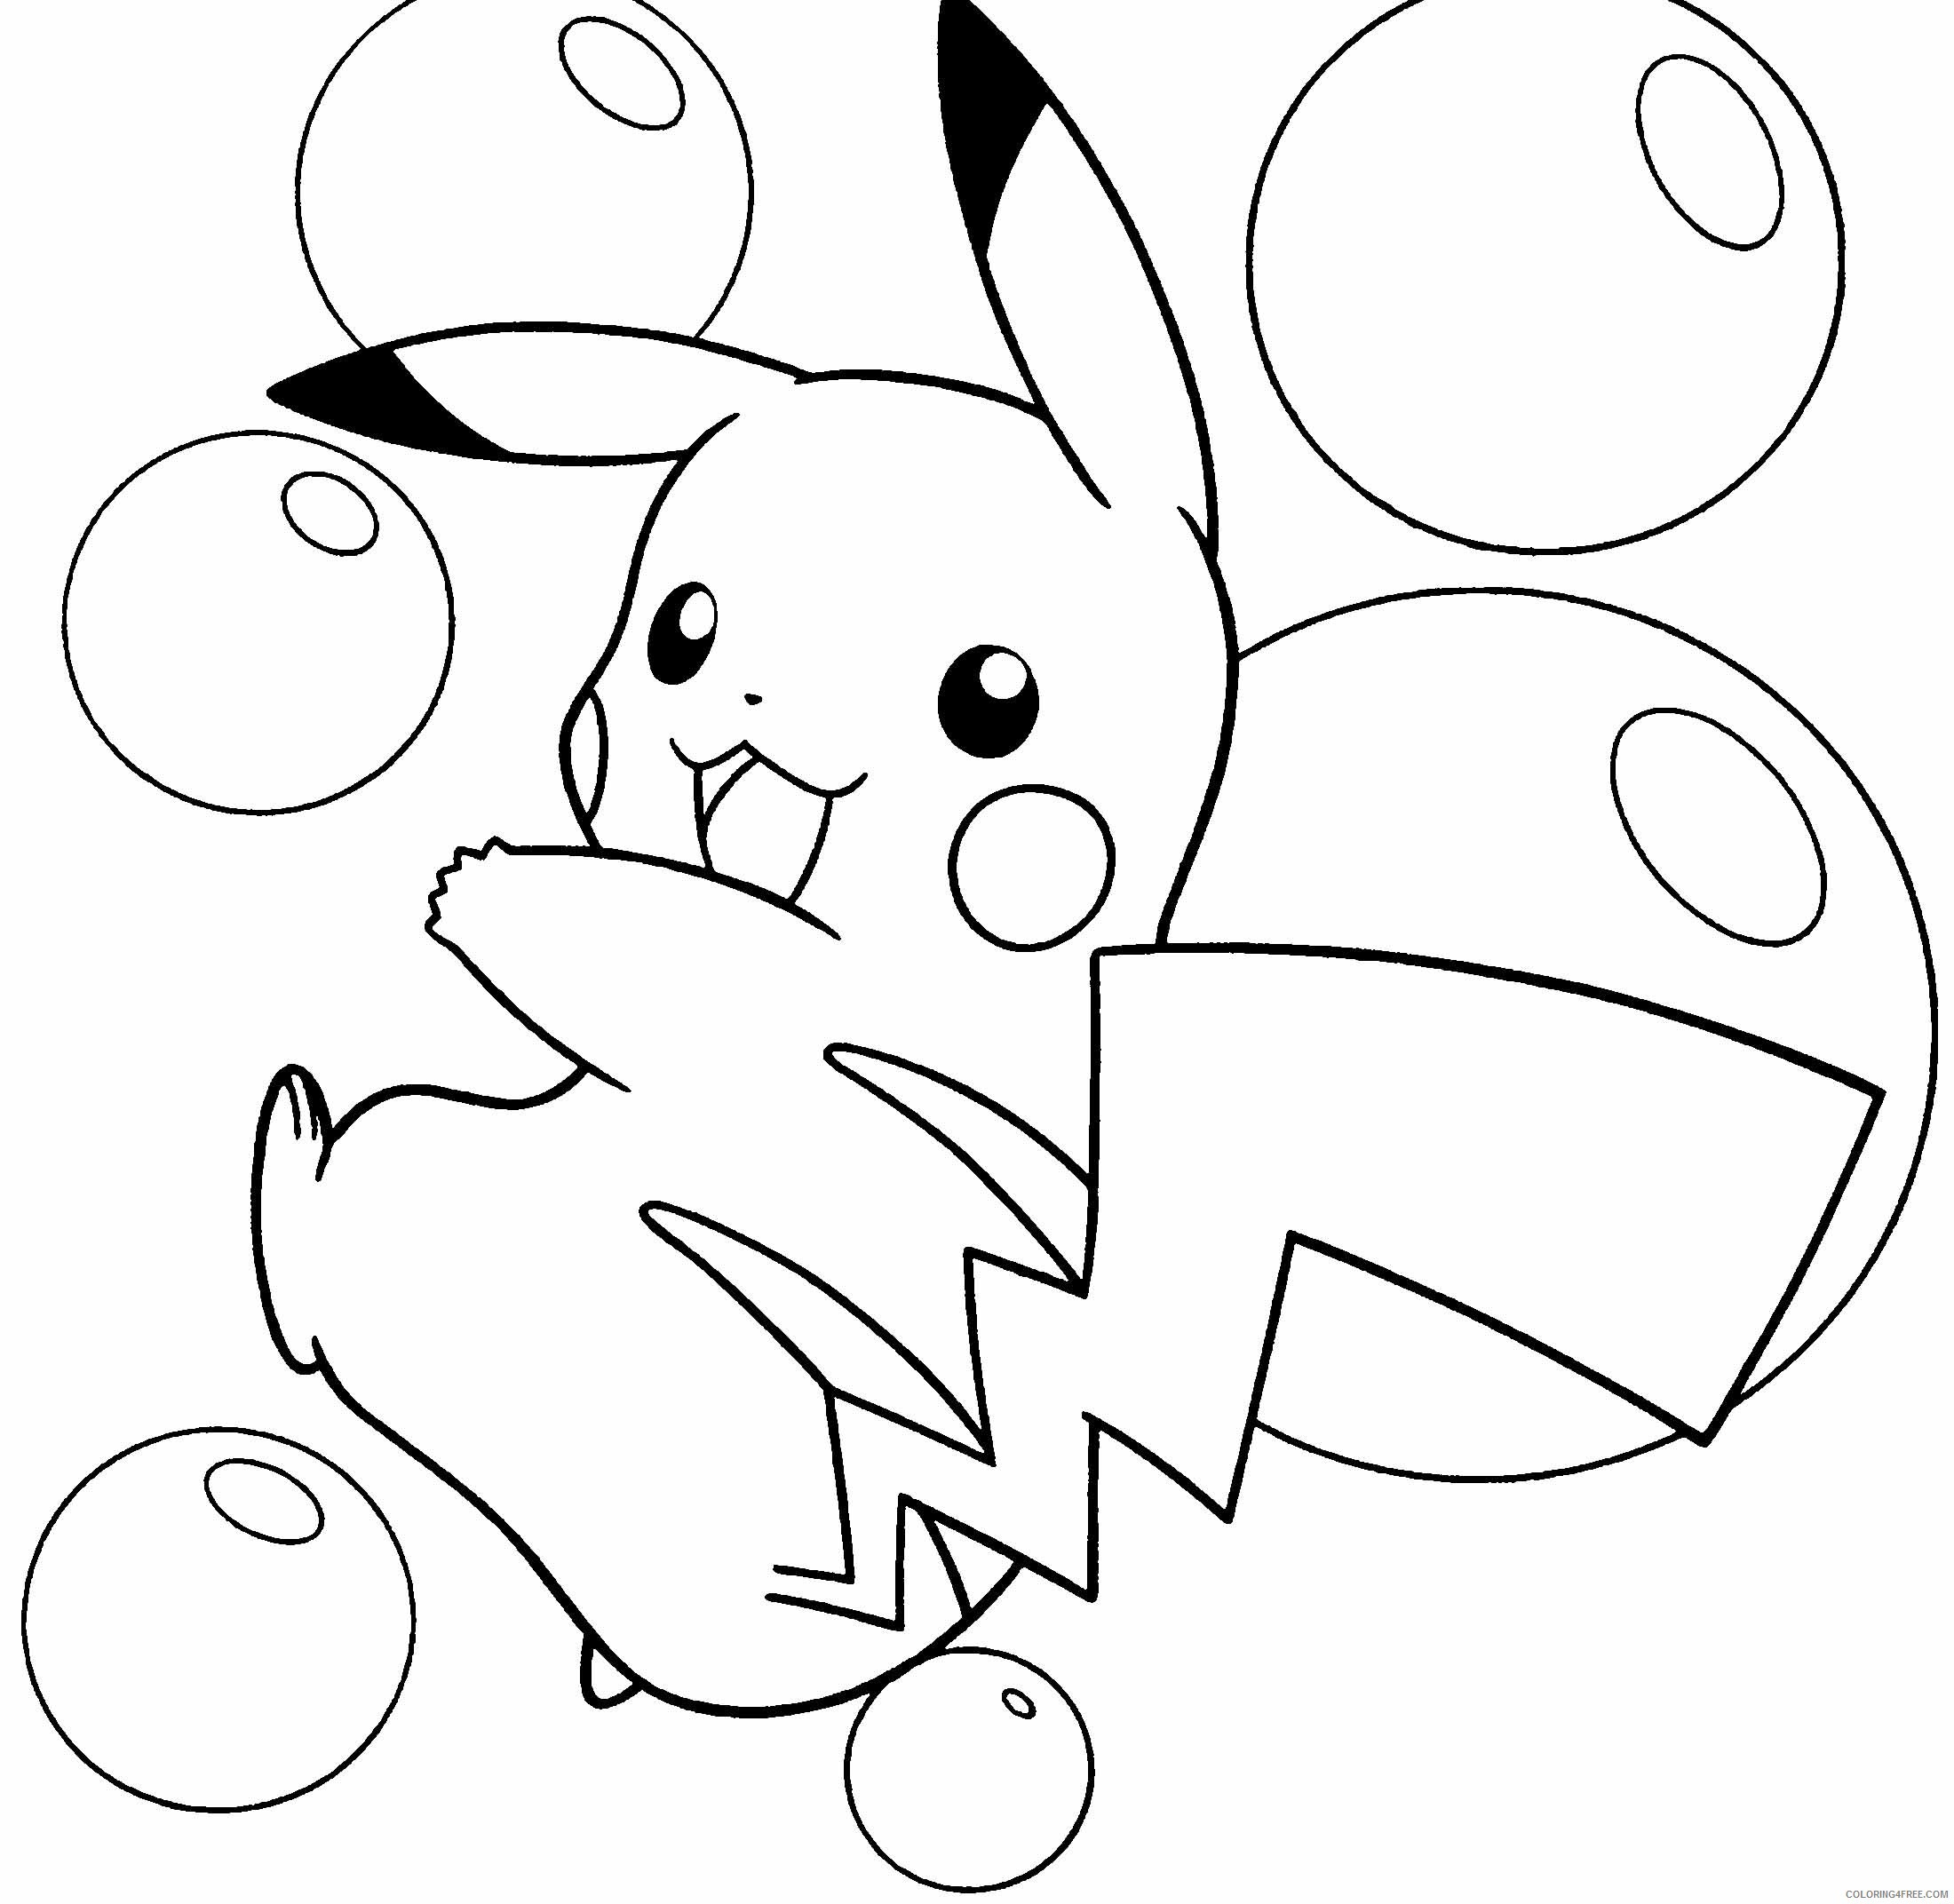 pikachu coloring pages playing bubbles Coloring4free